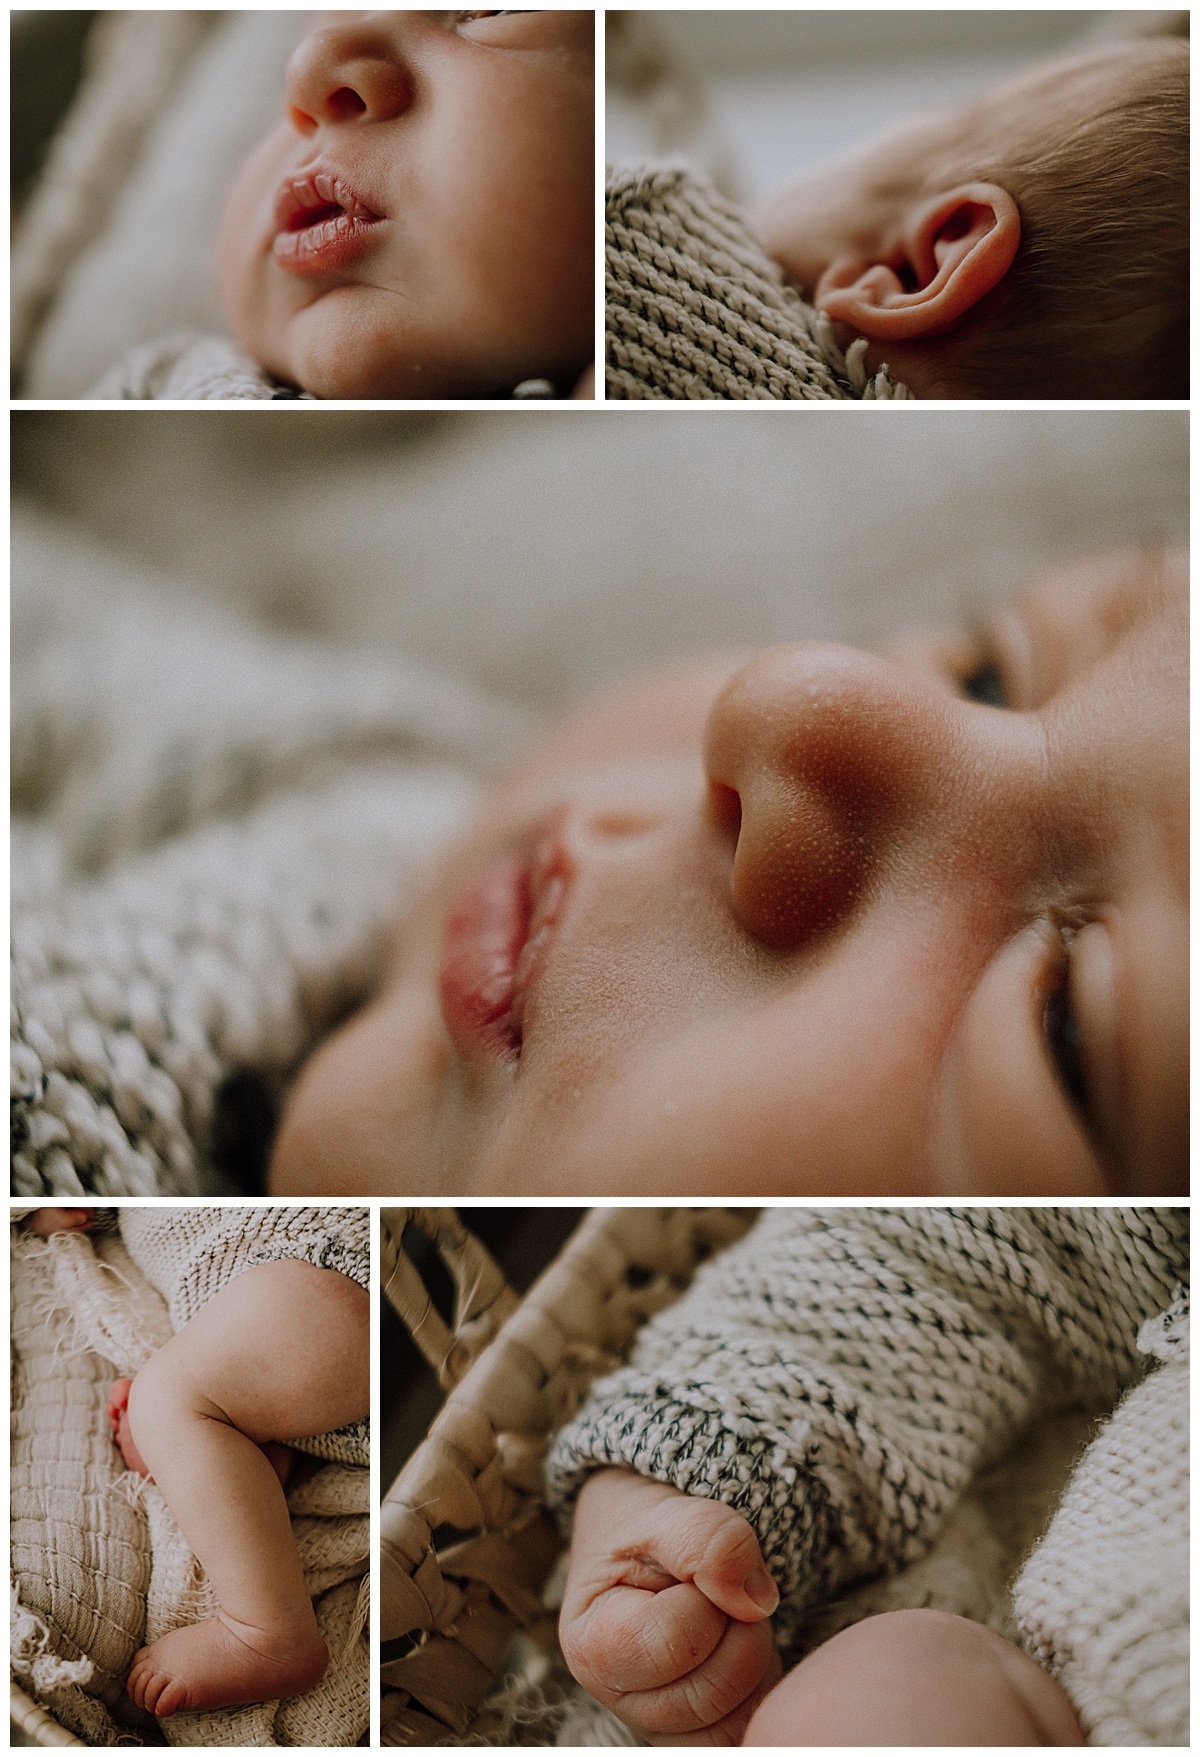 Up close and facial details of infant by Washington DC Newborn Photographer